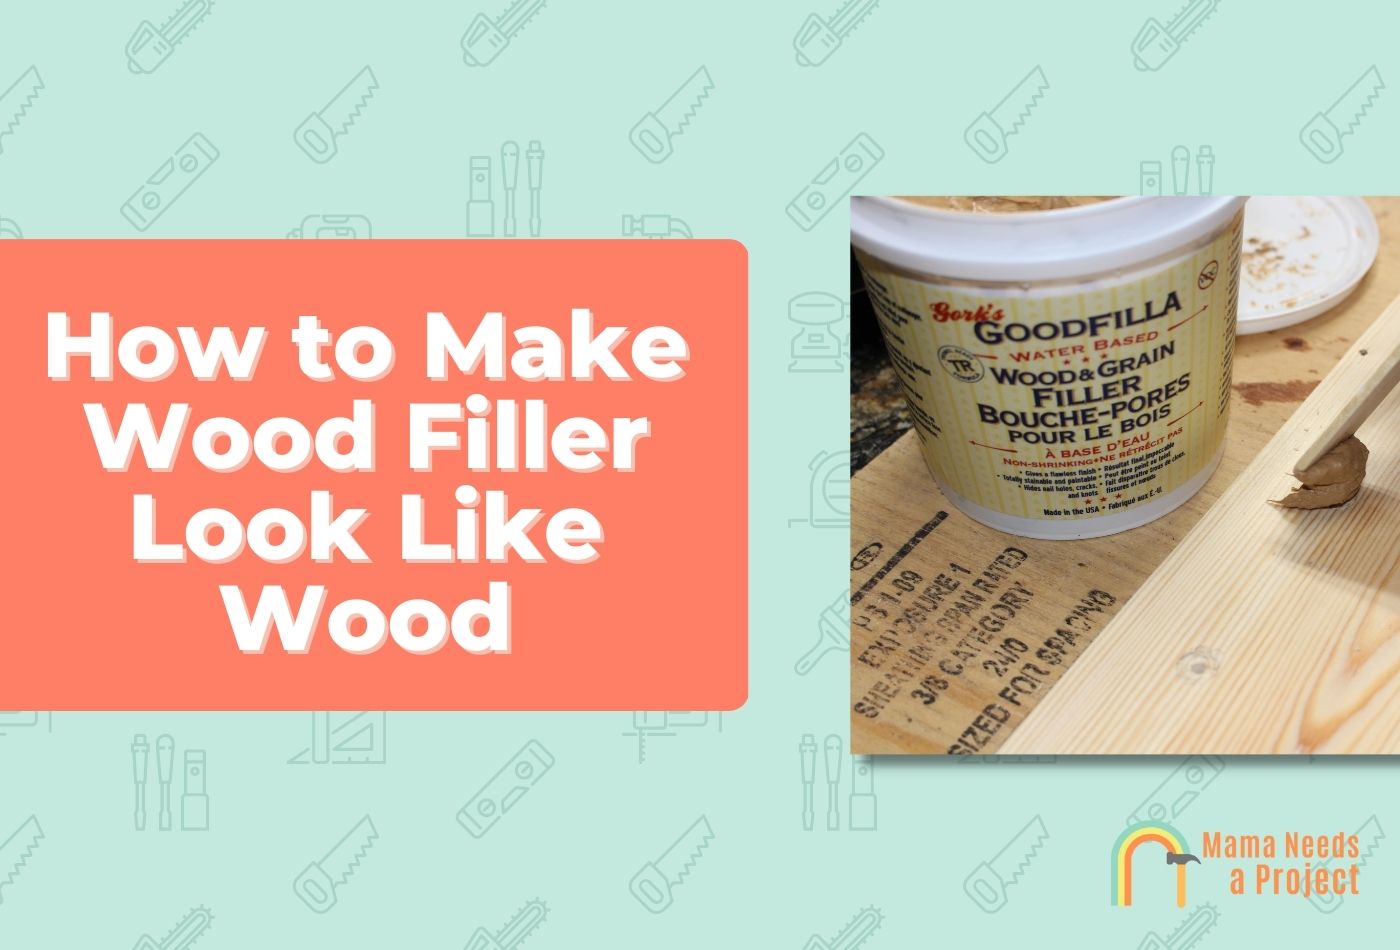 How to Make Wood Filler Look Like Wood